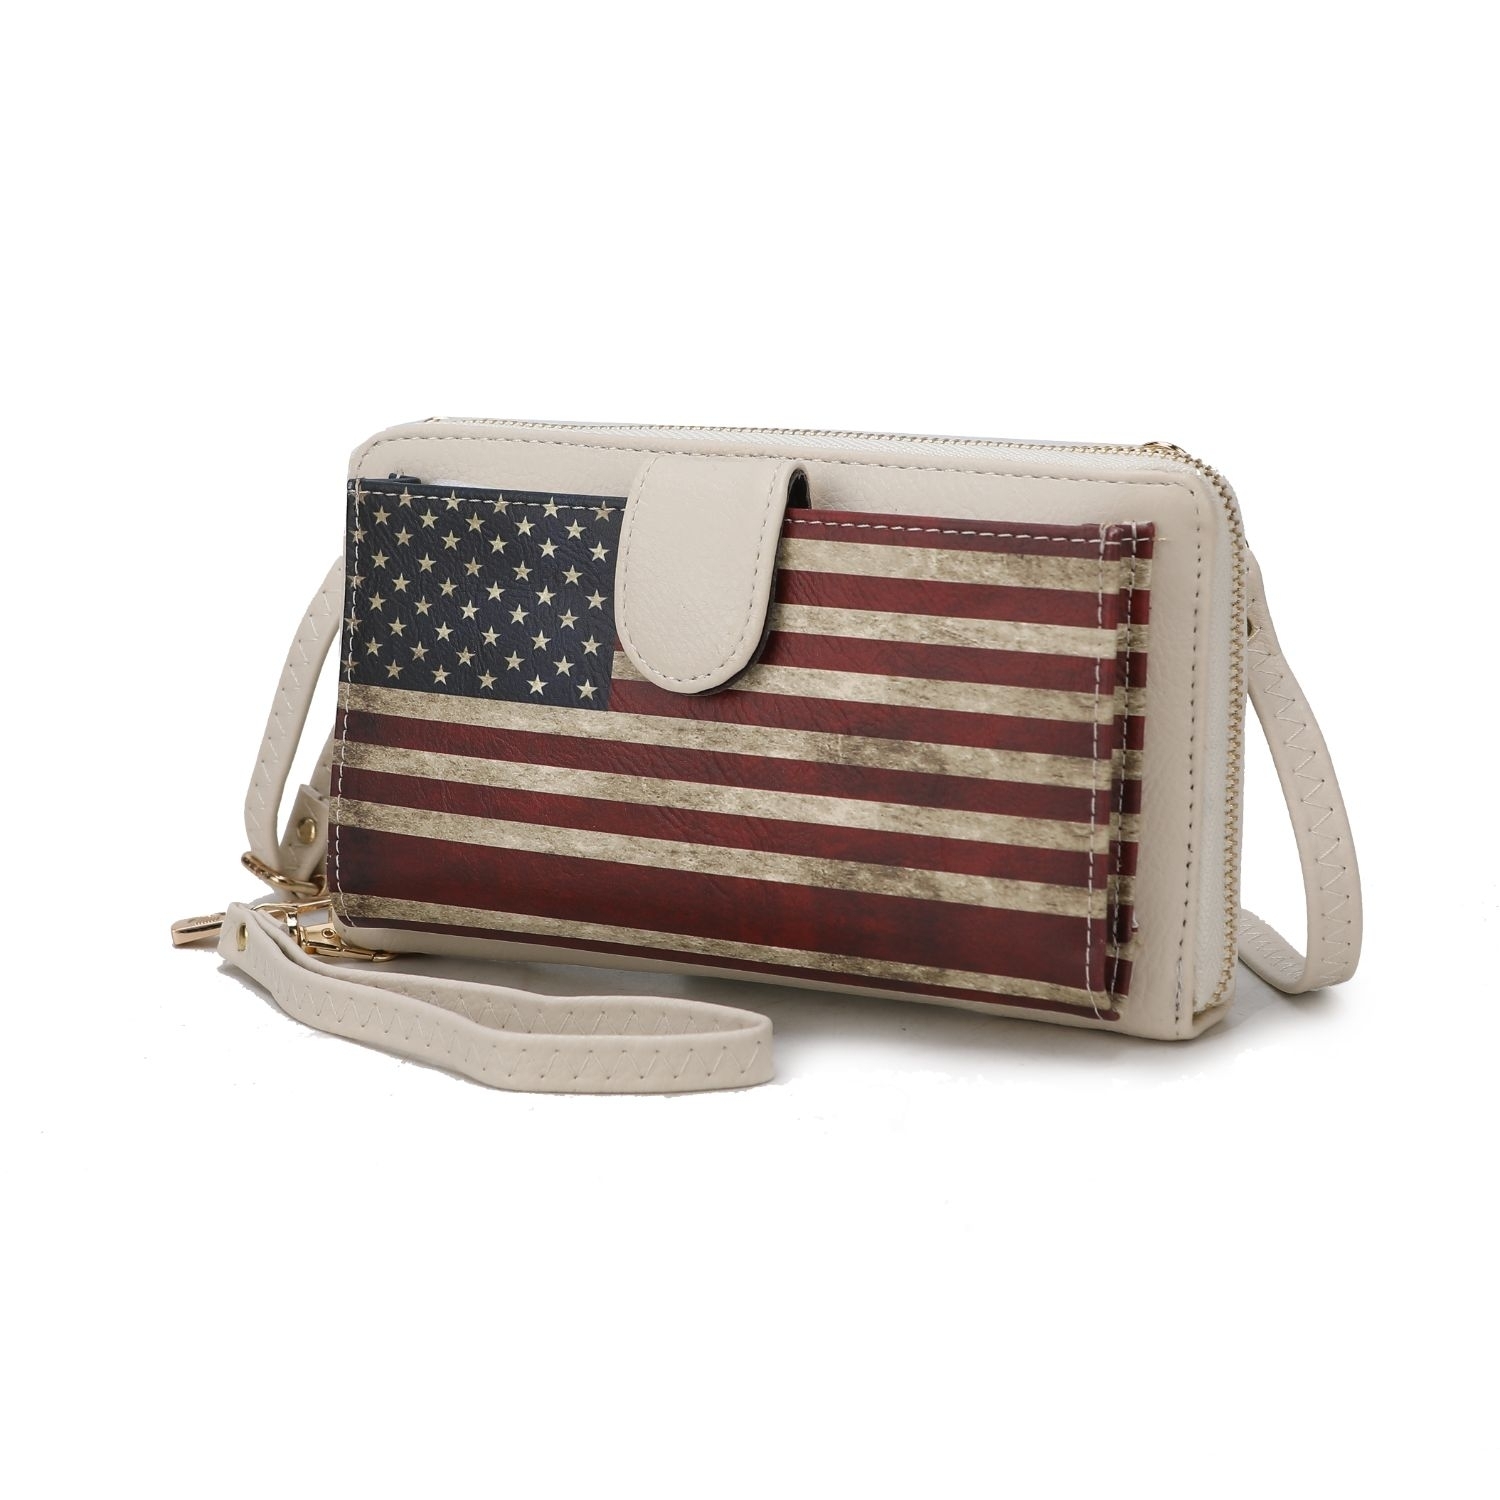 MKF Collection Kiara Smartphone And Wallet Convertible FLAG Crossbody Bag By Mia K - Turquoise